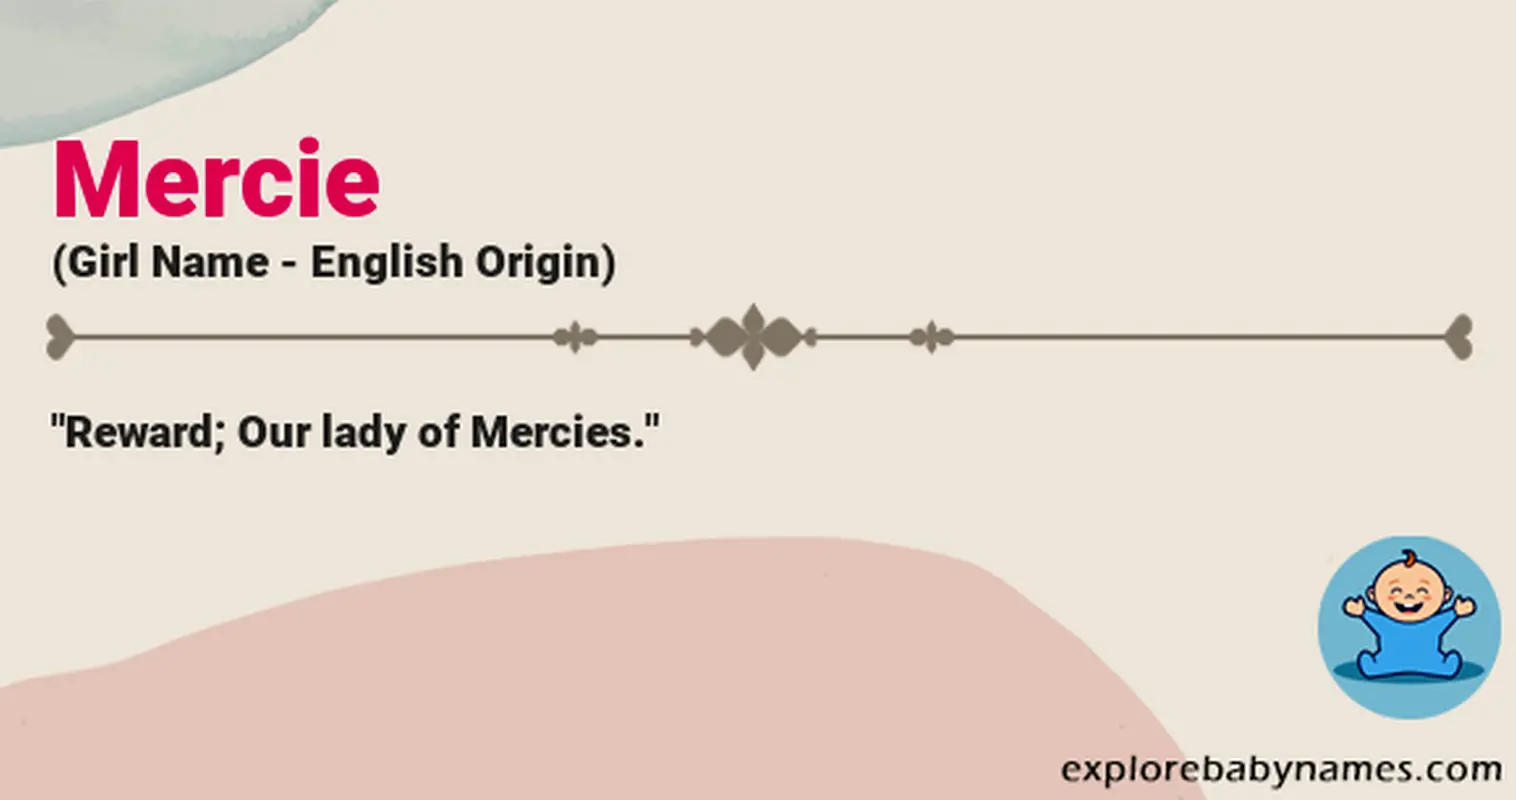 Meaning of Mercie